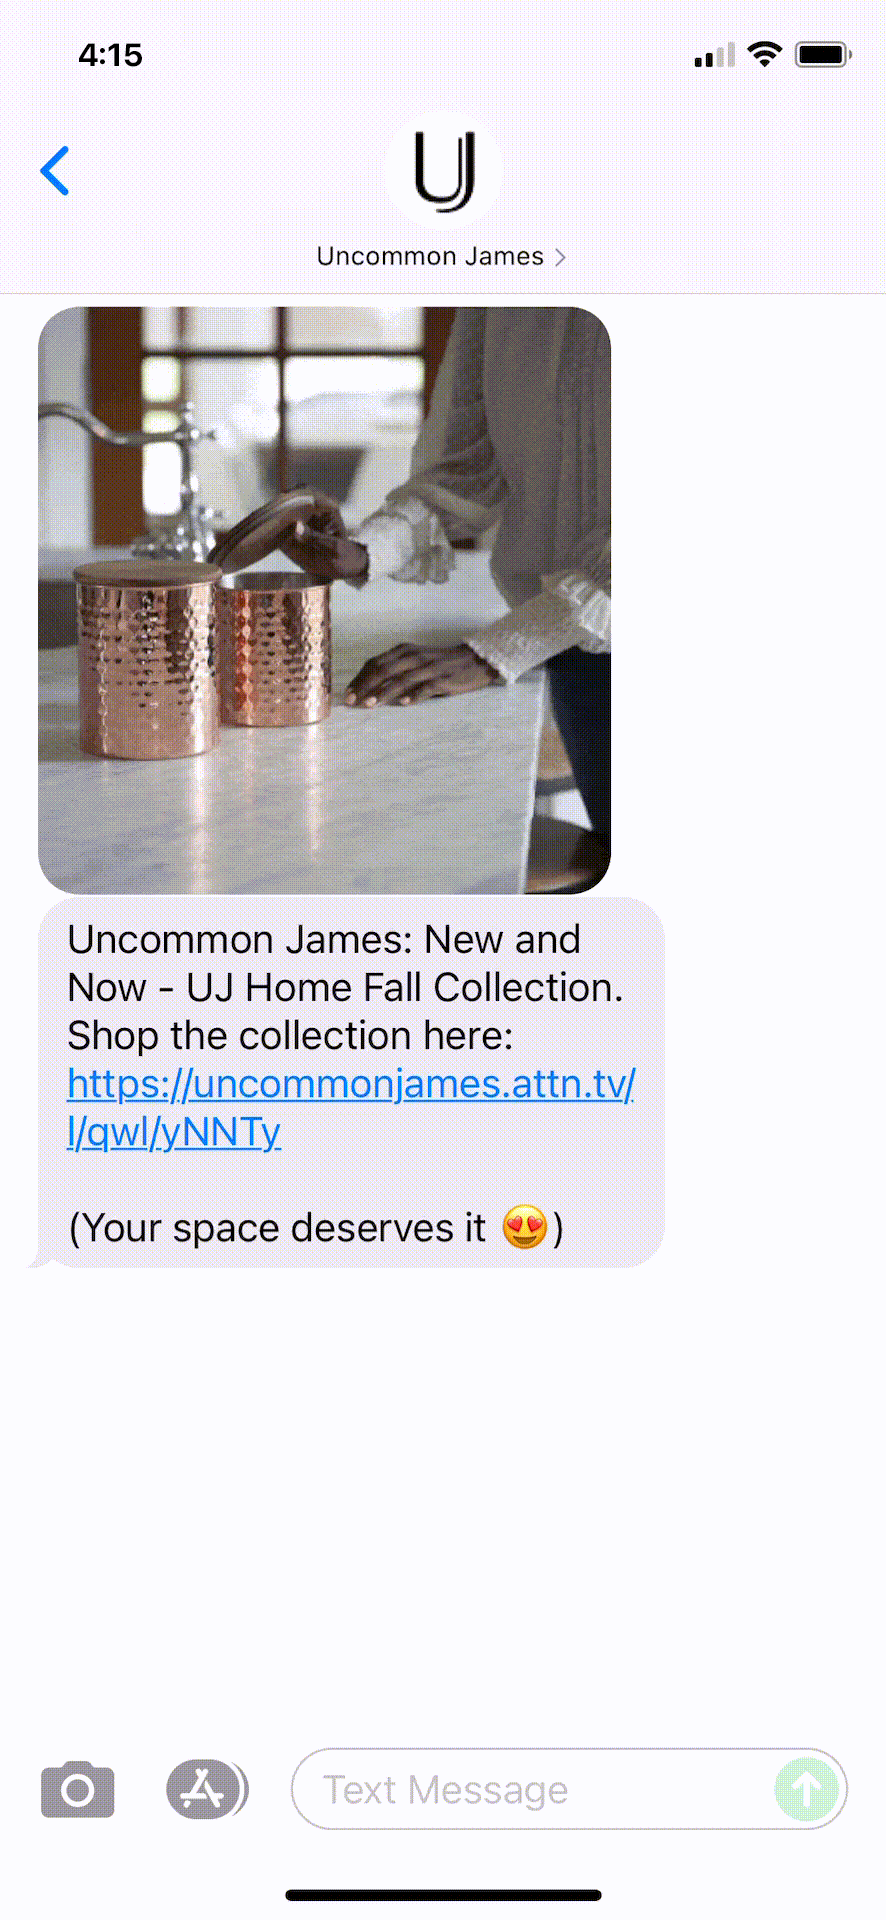 Uncommon-James-Text-Message-Marketing-Example-08.05.2021